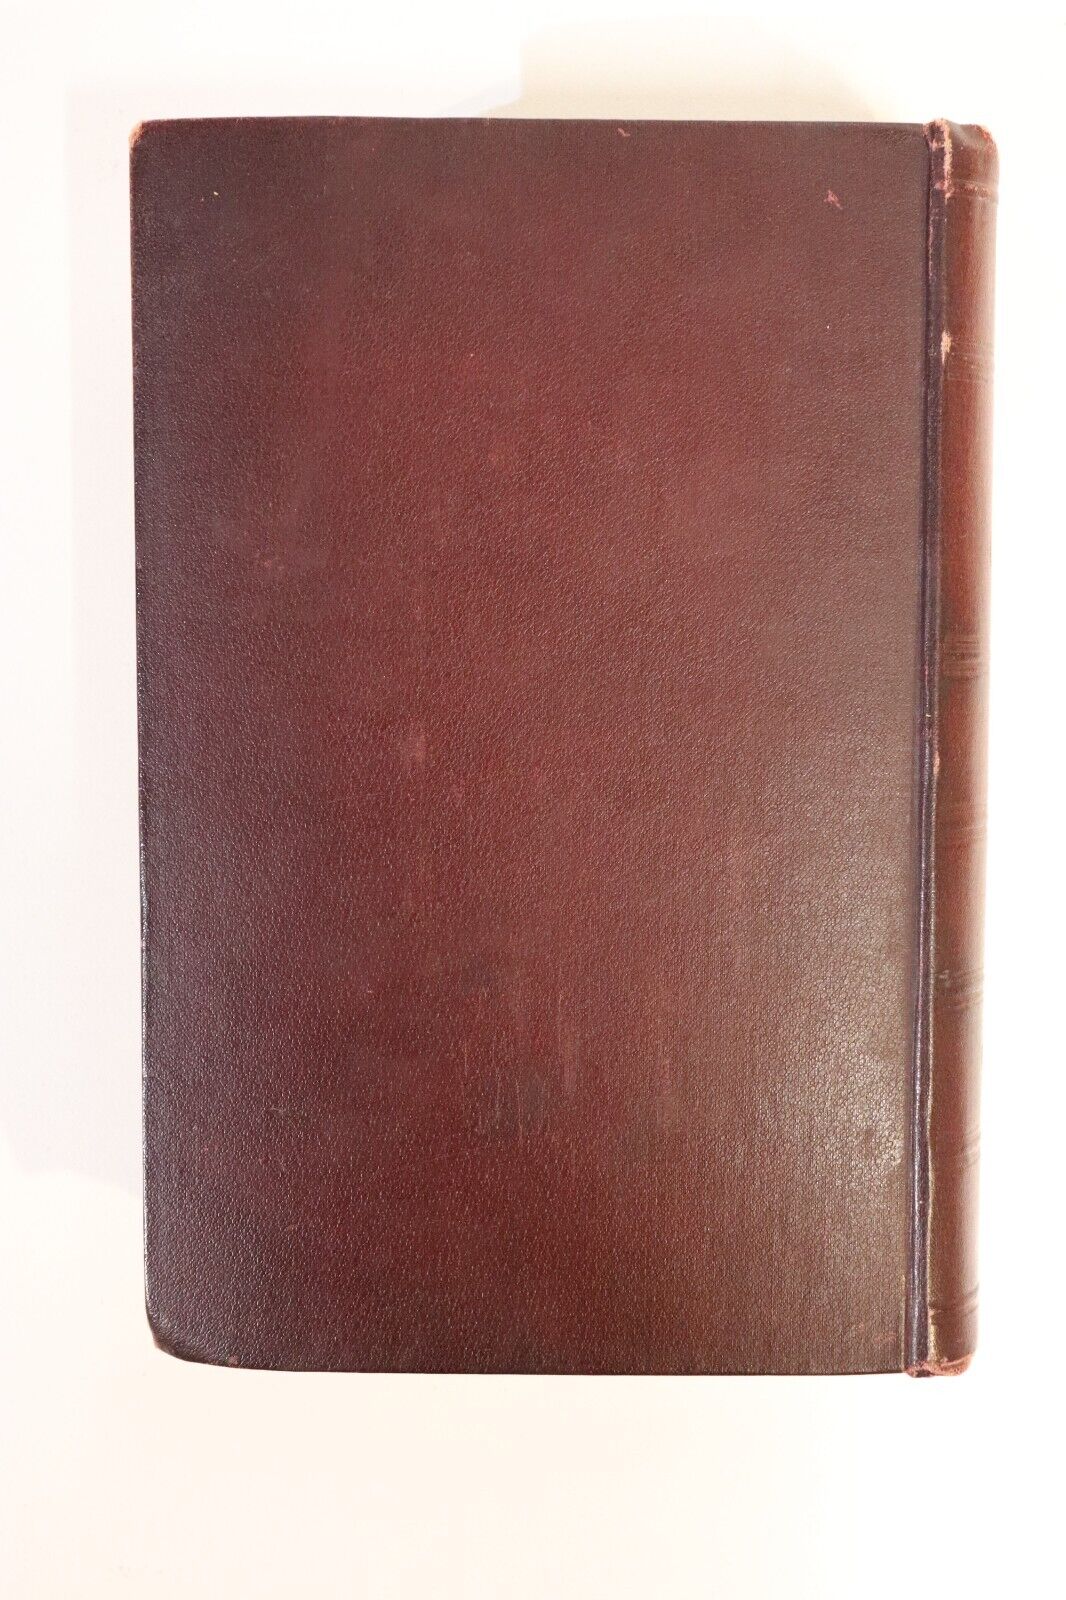 Journal Of The Iron & Steel Institute - 1914 - Antique History Book